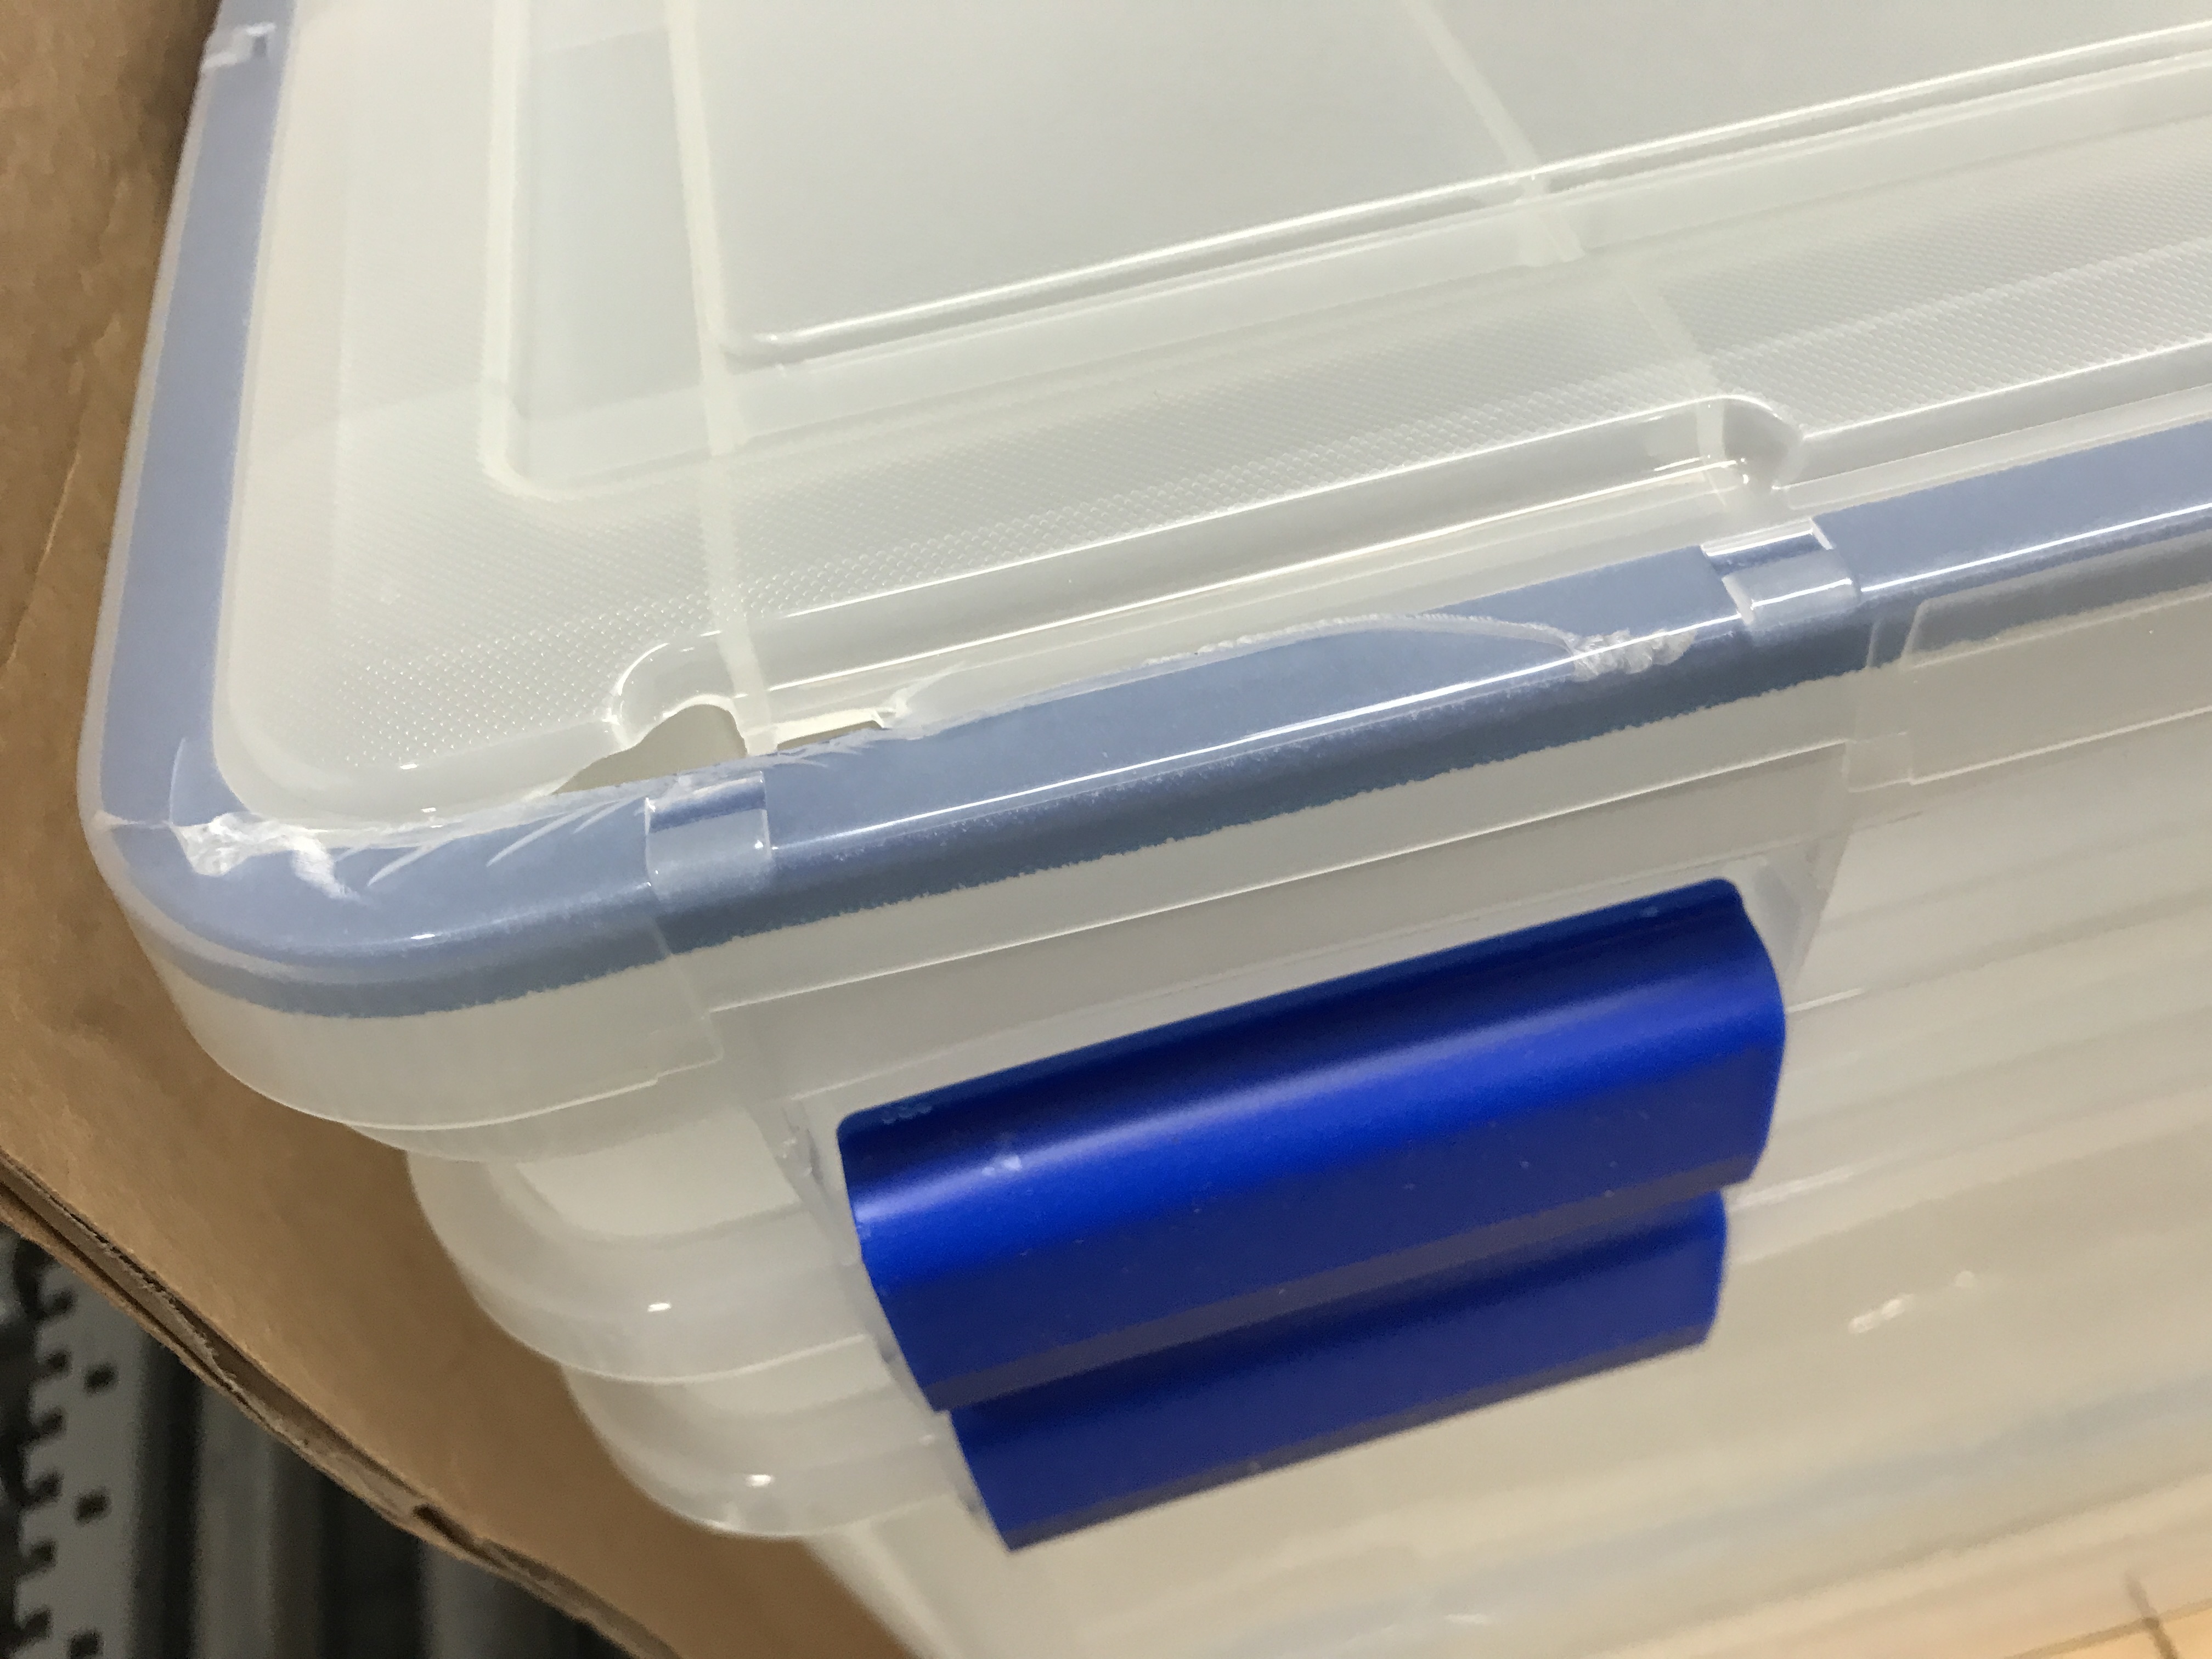 Photo 4 of **DAMAGED**
IRIS USA 70 Quart WEATHERPRO Plastic Storage Box with Durable Lid and Seal and Secure Latching Buckles, Clear With Blue Buckles, Weathertight, 3 Pack 70 Quart - 3 Pack
**MISSING LID**